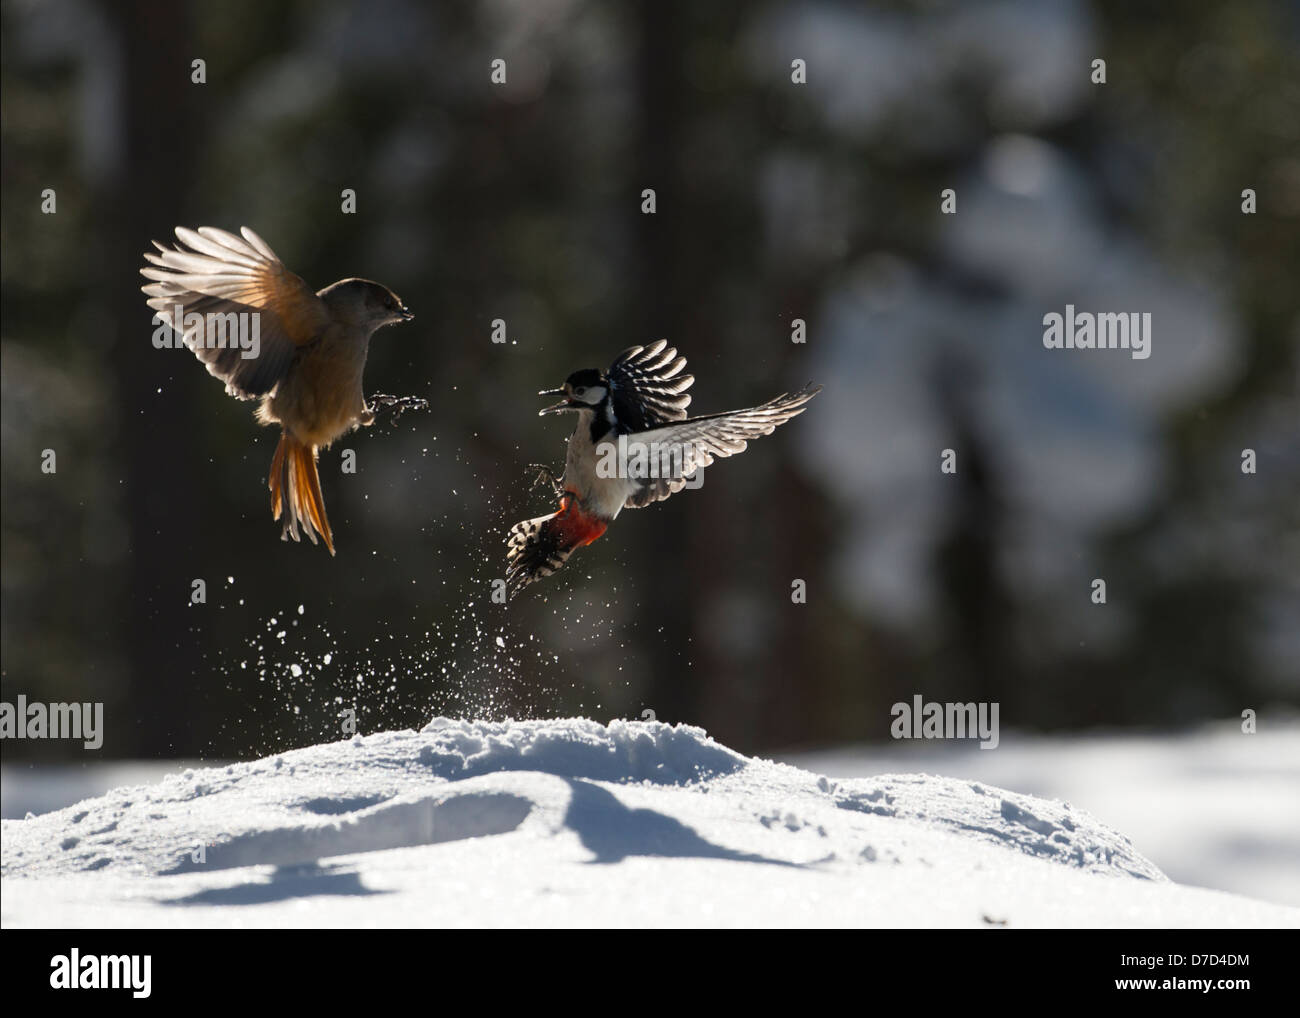 A fight between two birds, one a Siberian Jay the other a Great Spotted Woodpecker backlit in snow in the frozforests of Finland Stock Photo